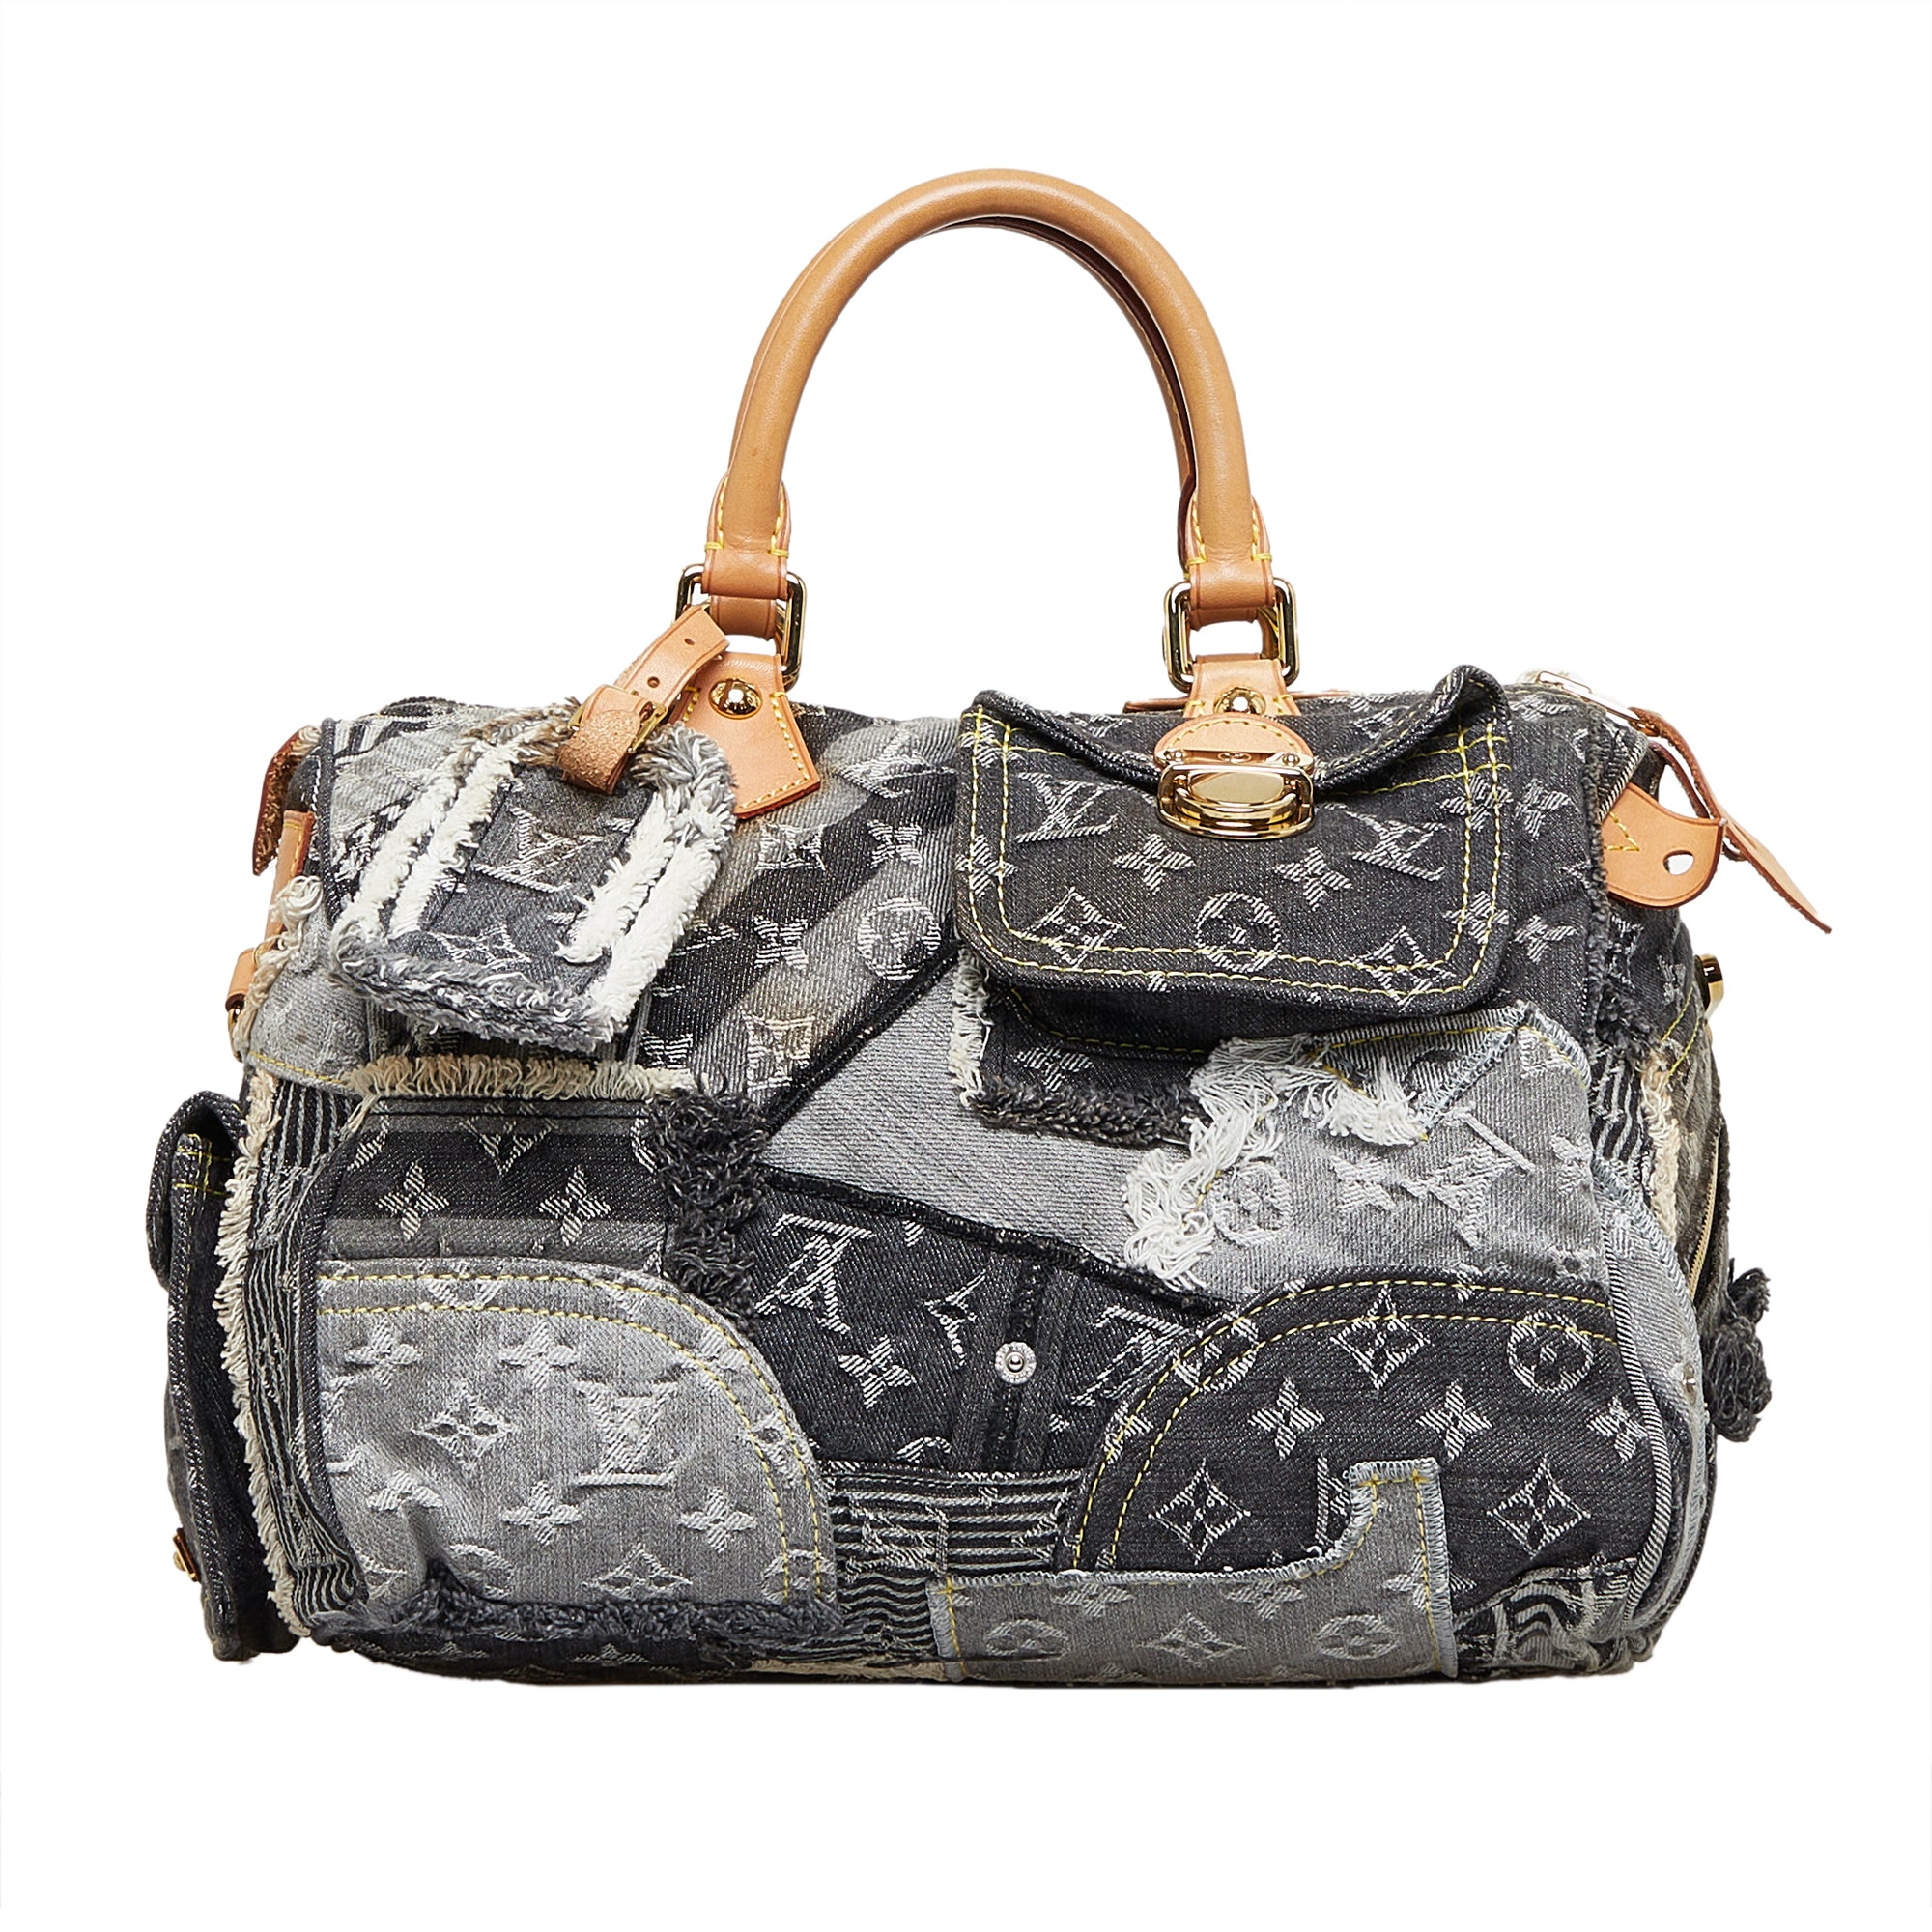 Pre-Owned Louis Vuitton Speedy Bags at DDH - McKinney, TX Patch